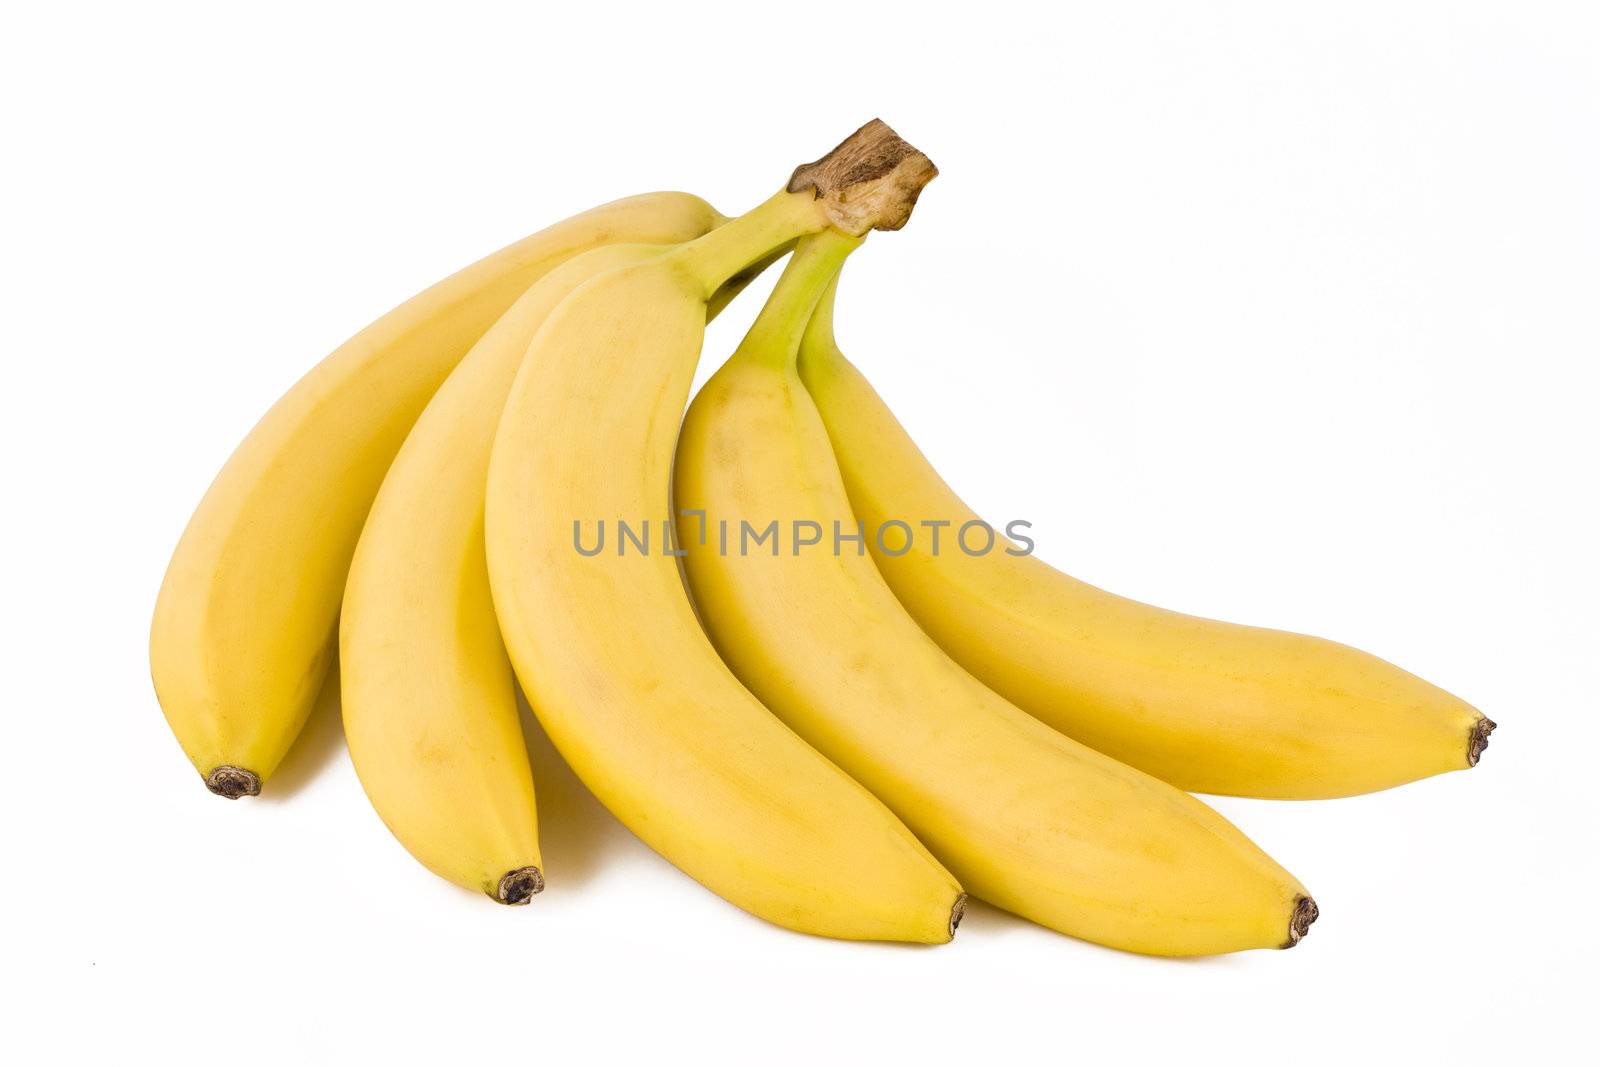 Bunch of five fresh bananas, tropical fruits isolated on white